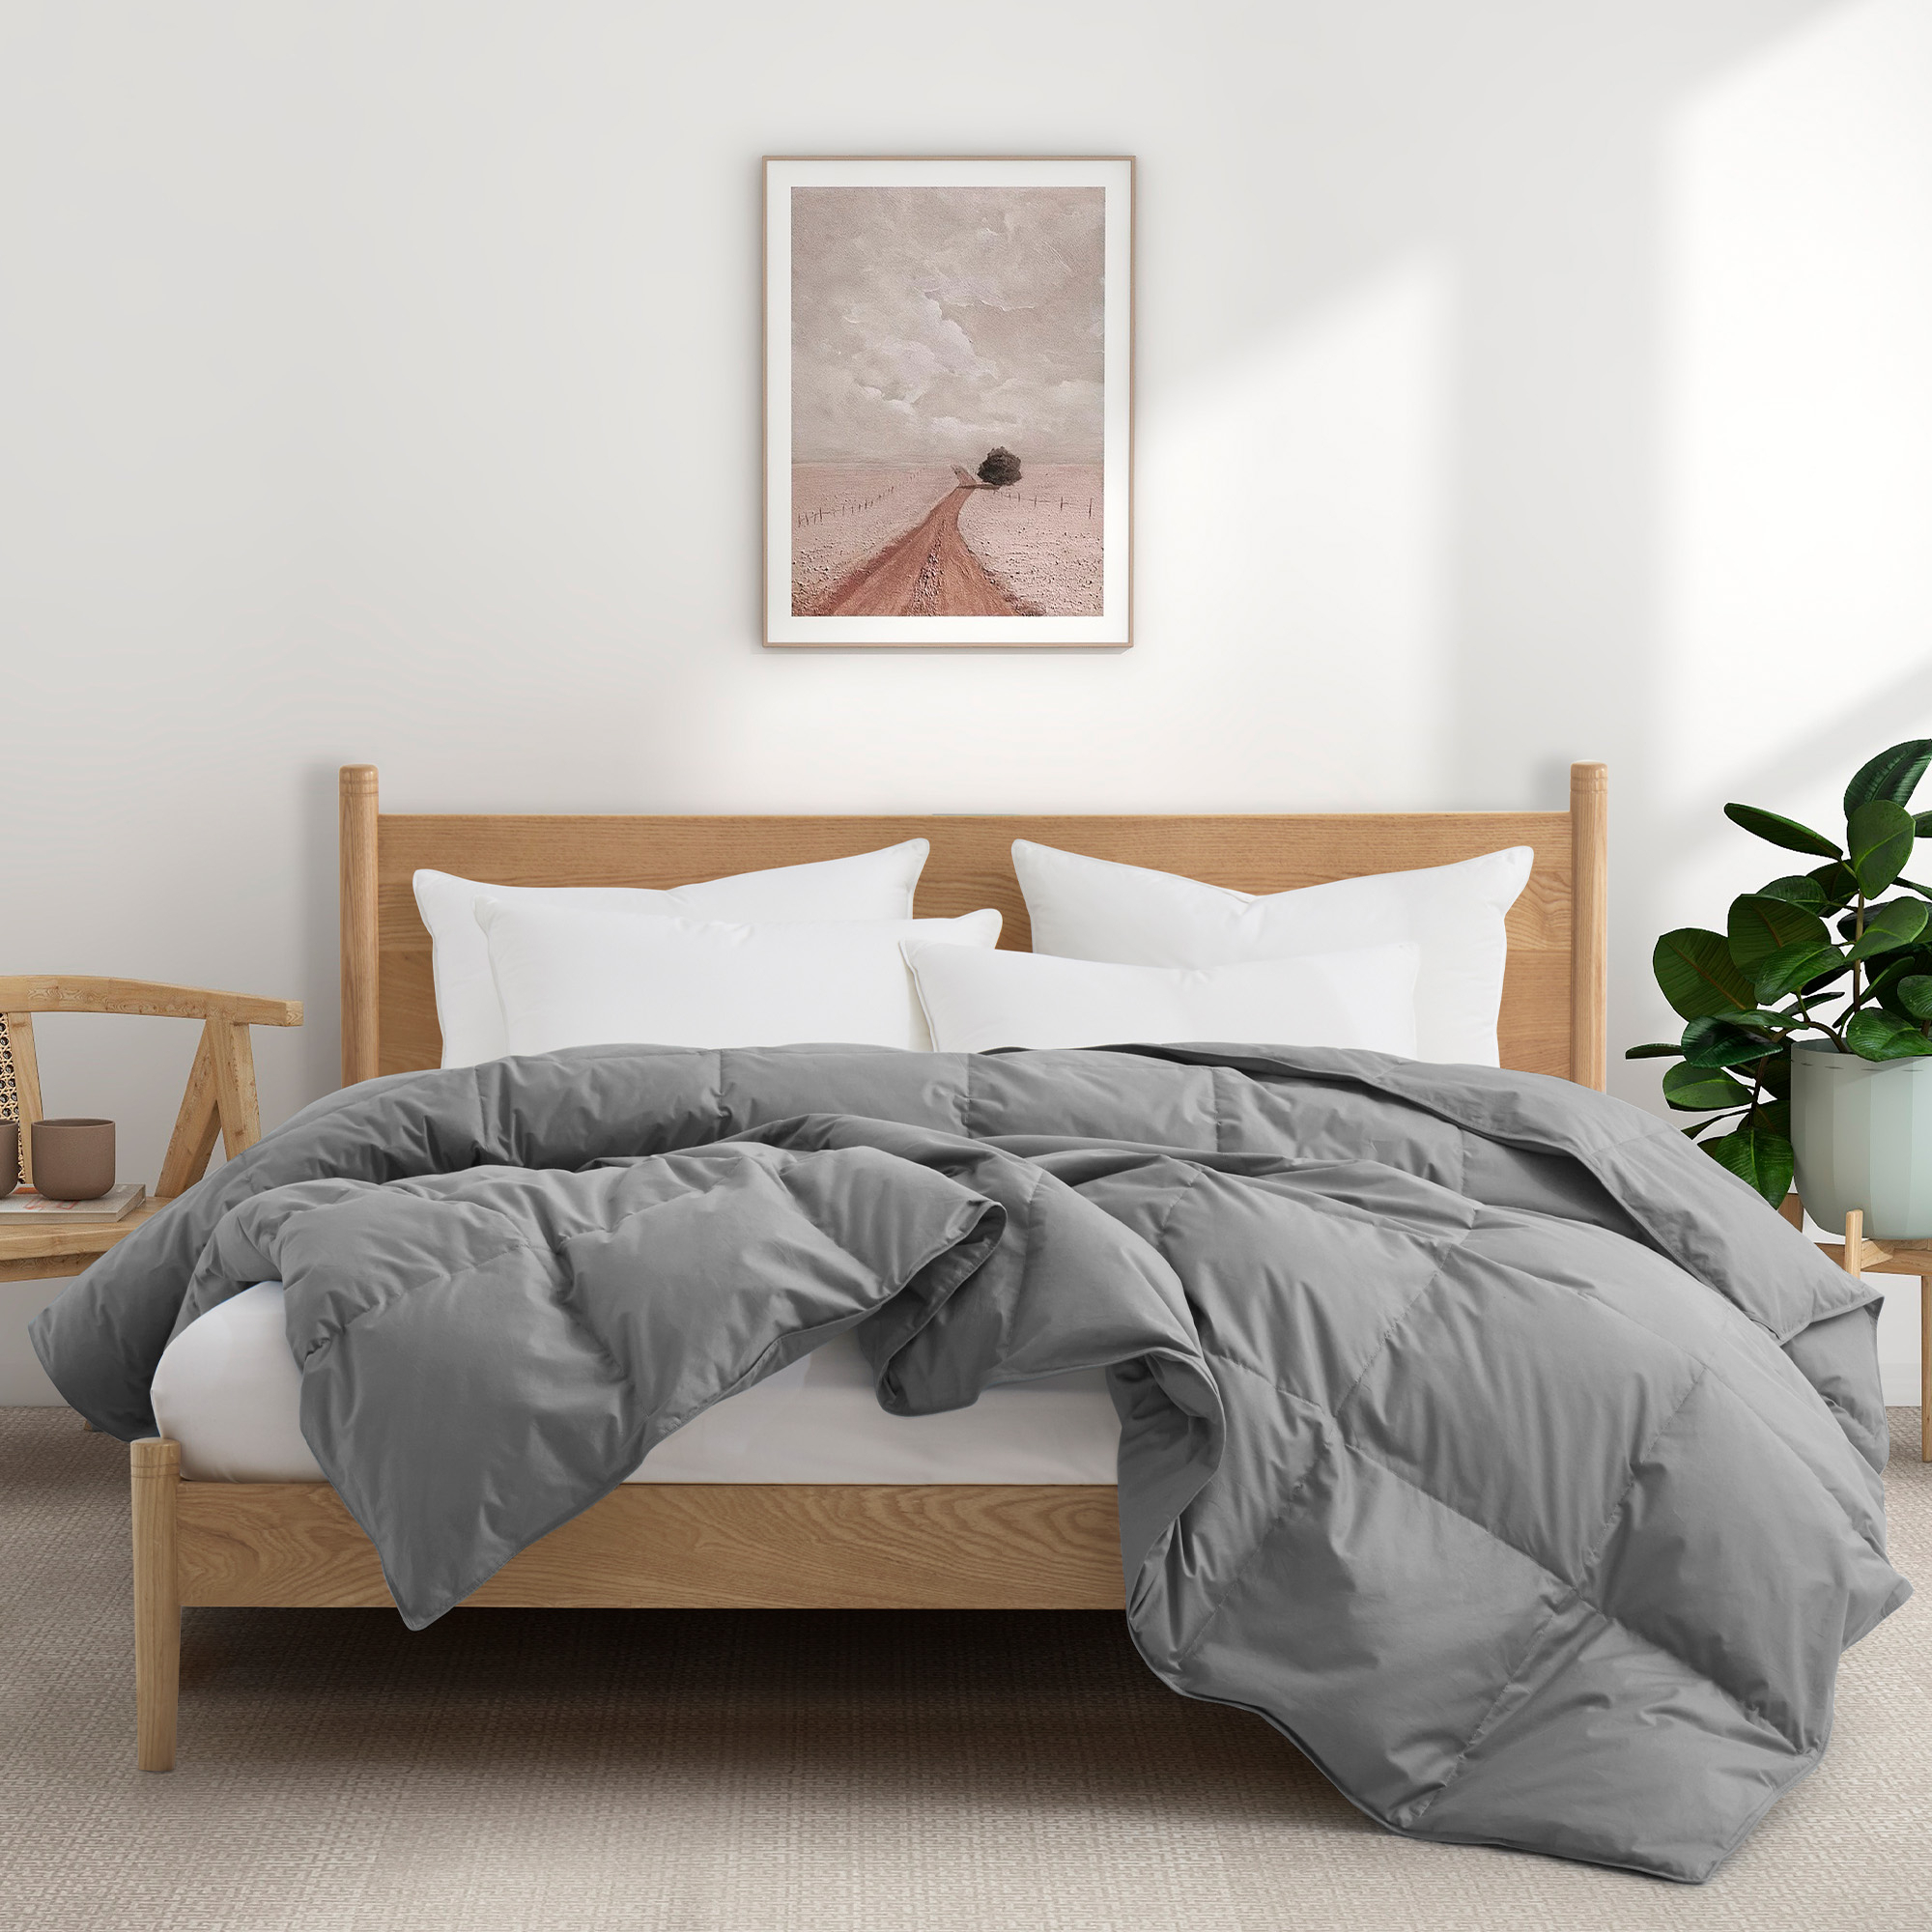 All Season Organic Cotton Comforter Filled With Down And Feather Fiber - Gray, King